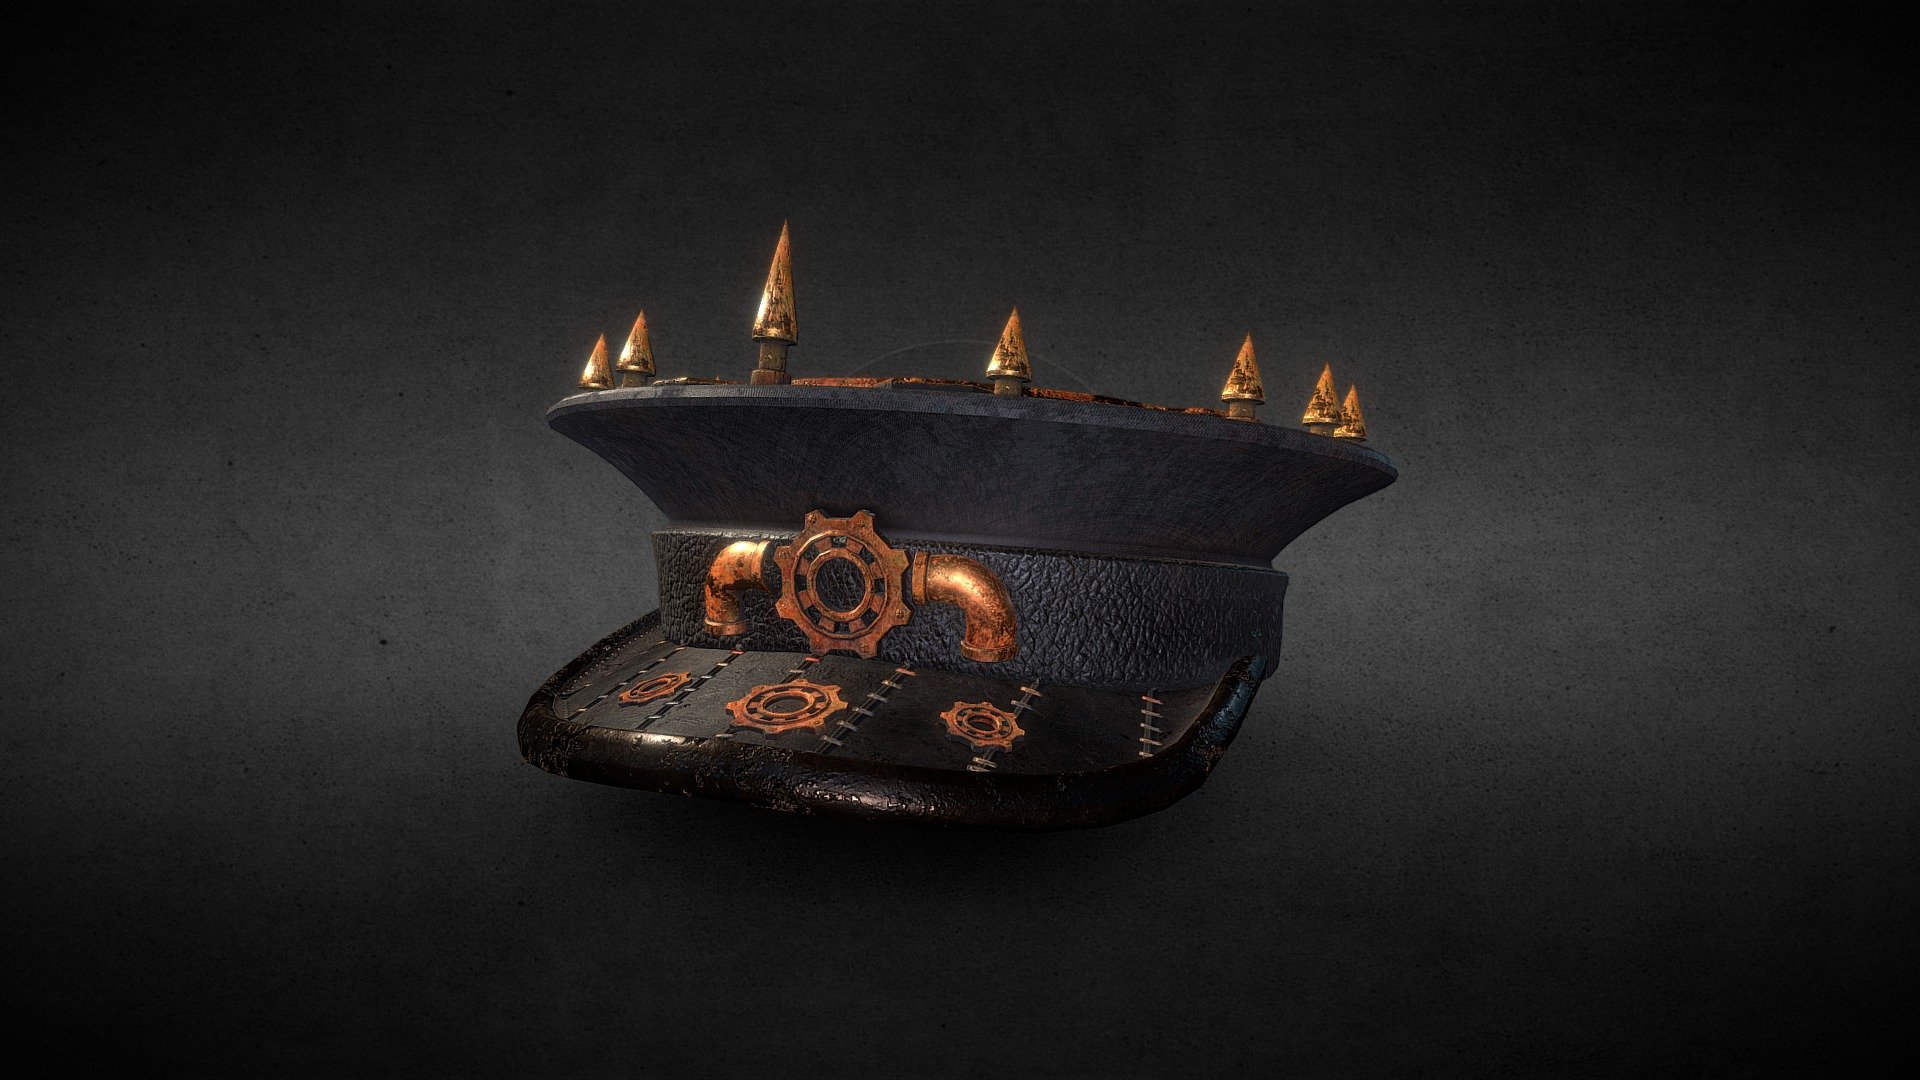 The Old Captain's Hat